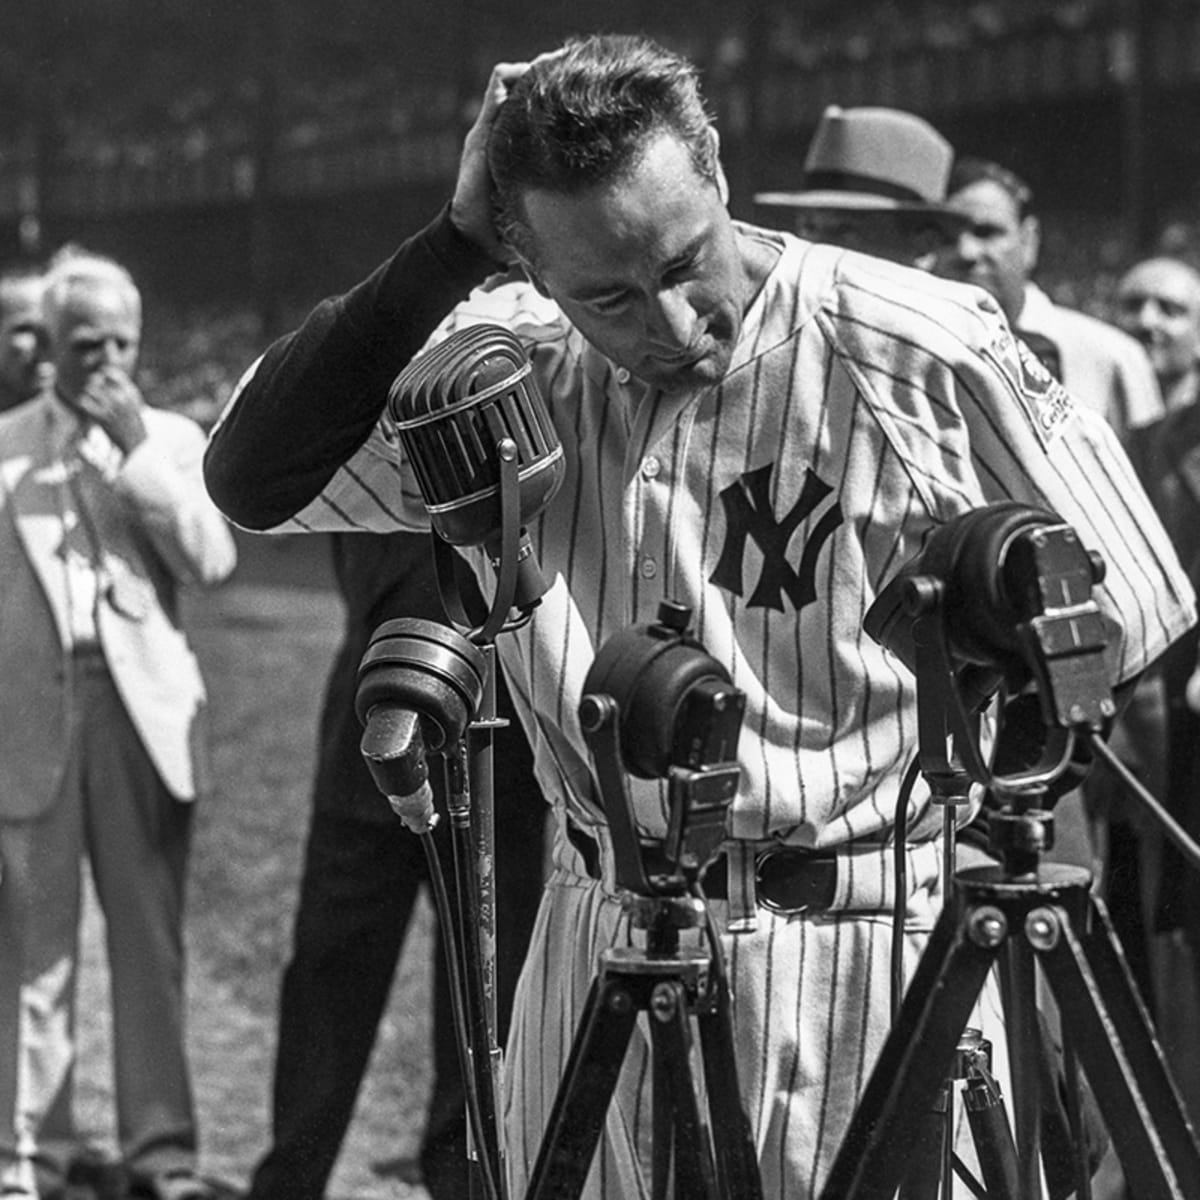 See Lou Gehrig giving his farewell speech in color for the first time